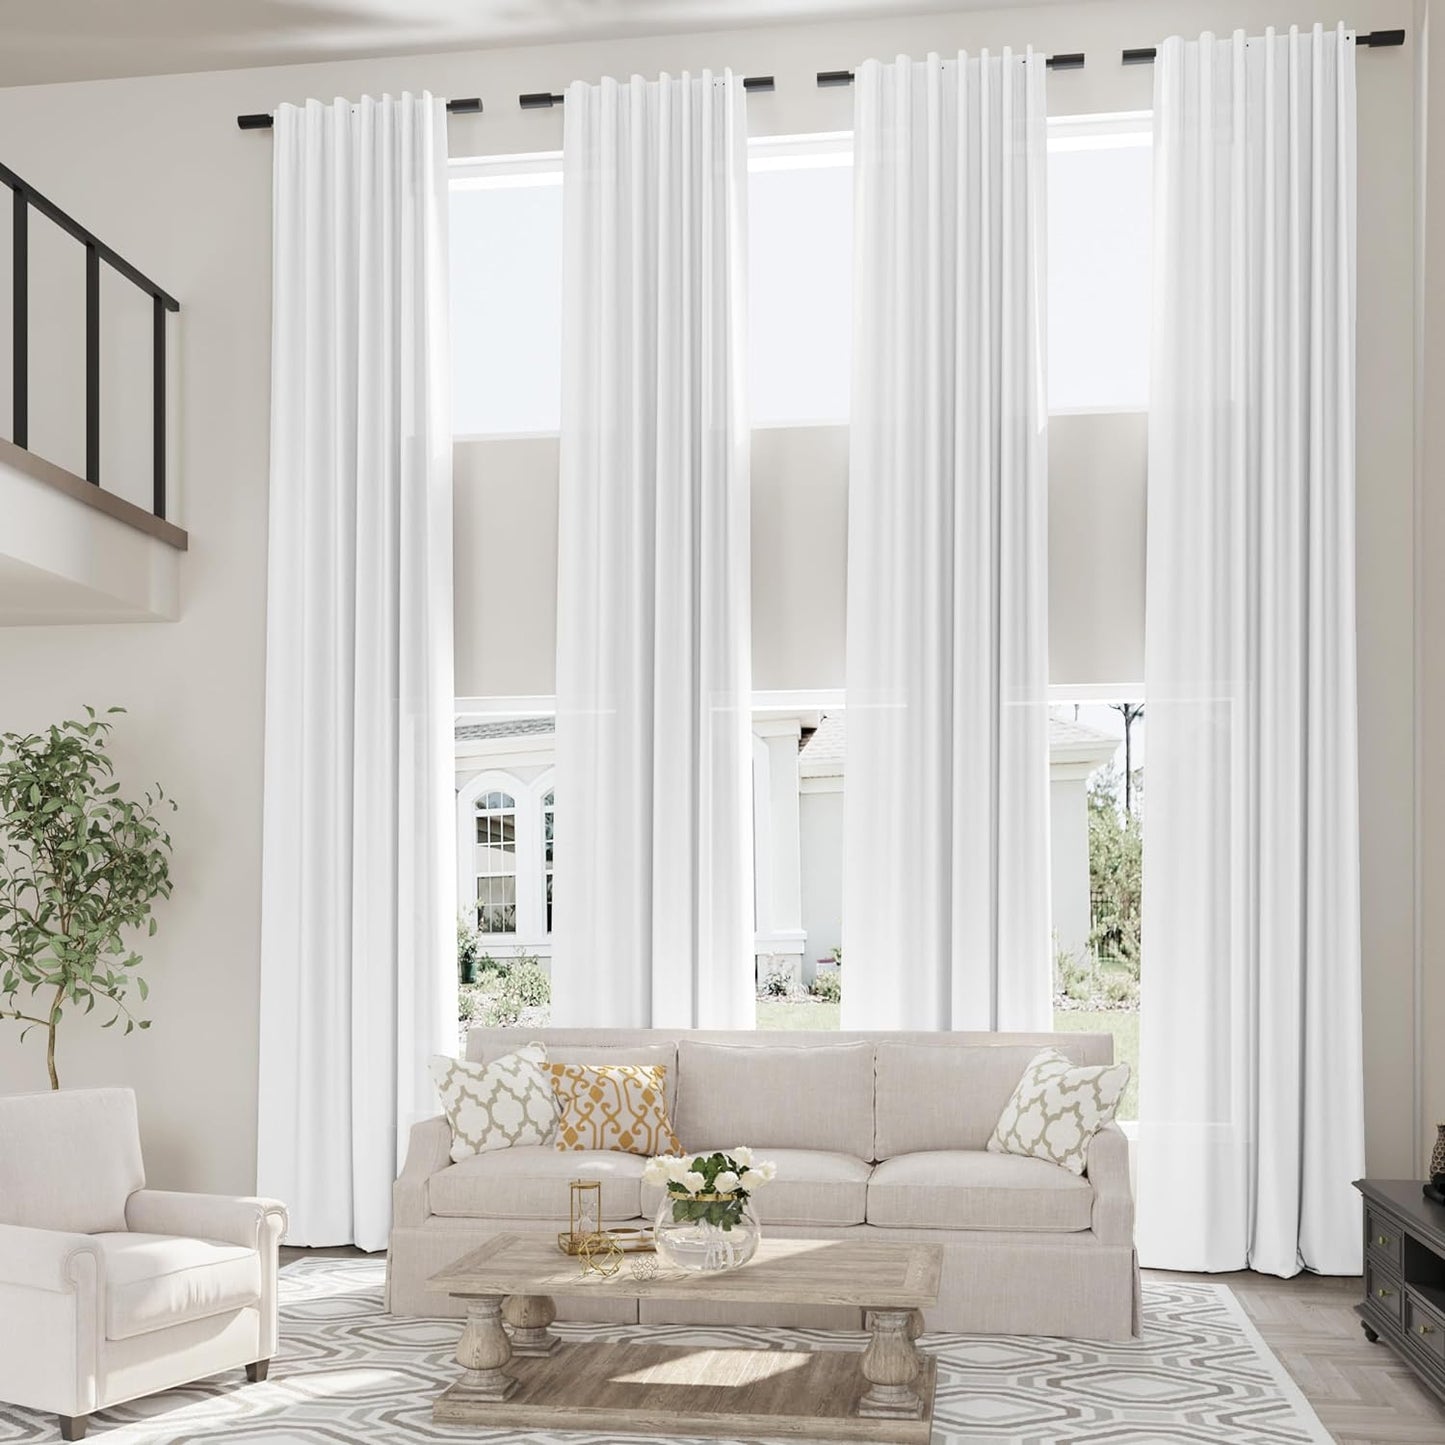 132 Inch Linen Curtains for High Ceiling Living Room Back Tab Hooks Pinch Pleat Custom Made Drape Semi Sheer Extra Long Curtain 132 Inches Long for 2 Story Windows Sliding Door Cream Ivory Birch  Aersas White W52Xl132 